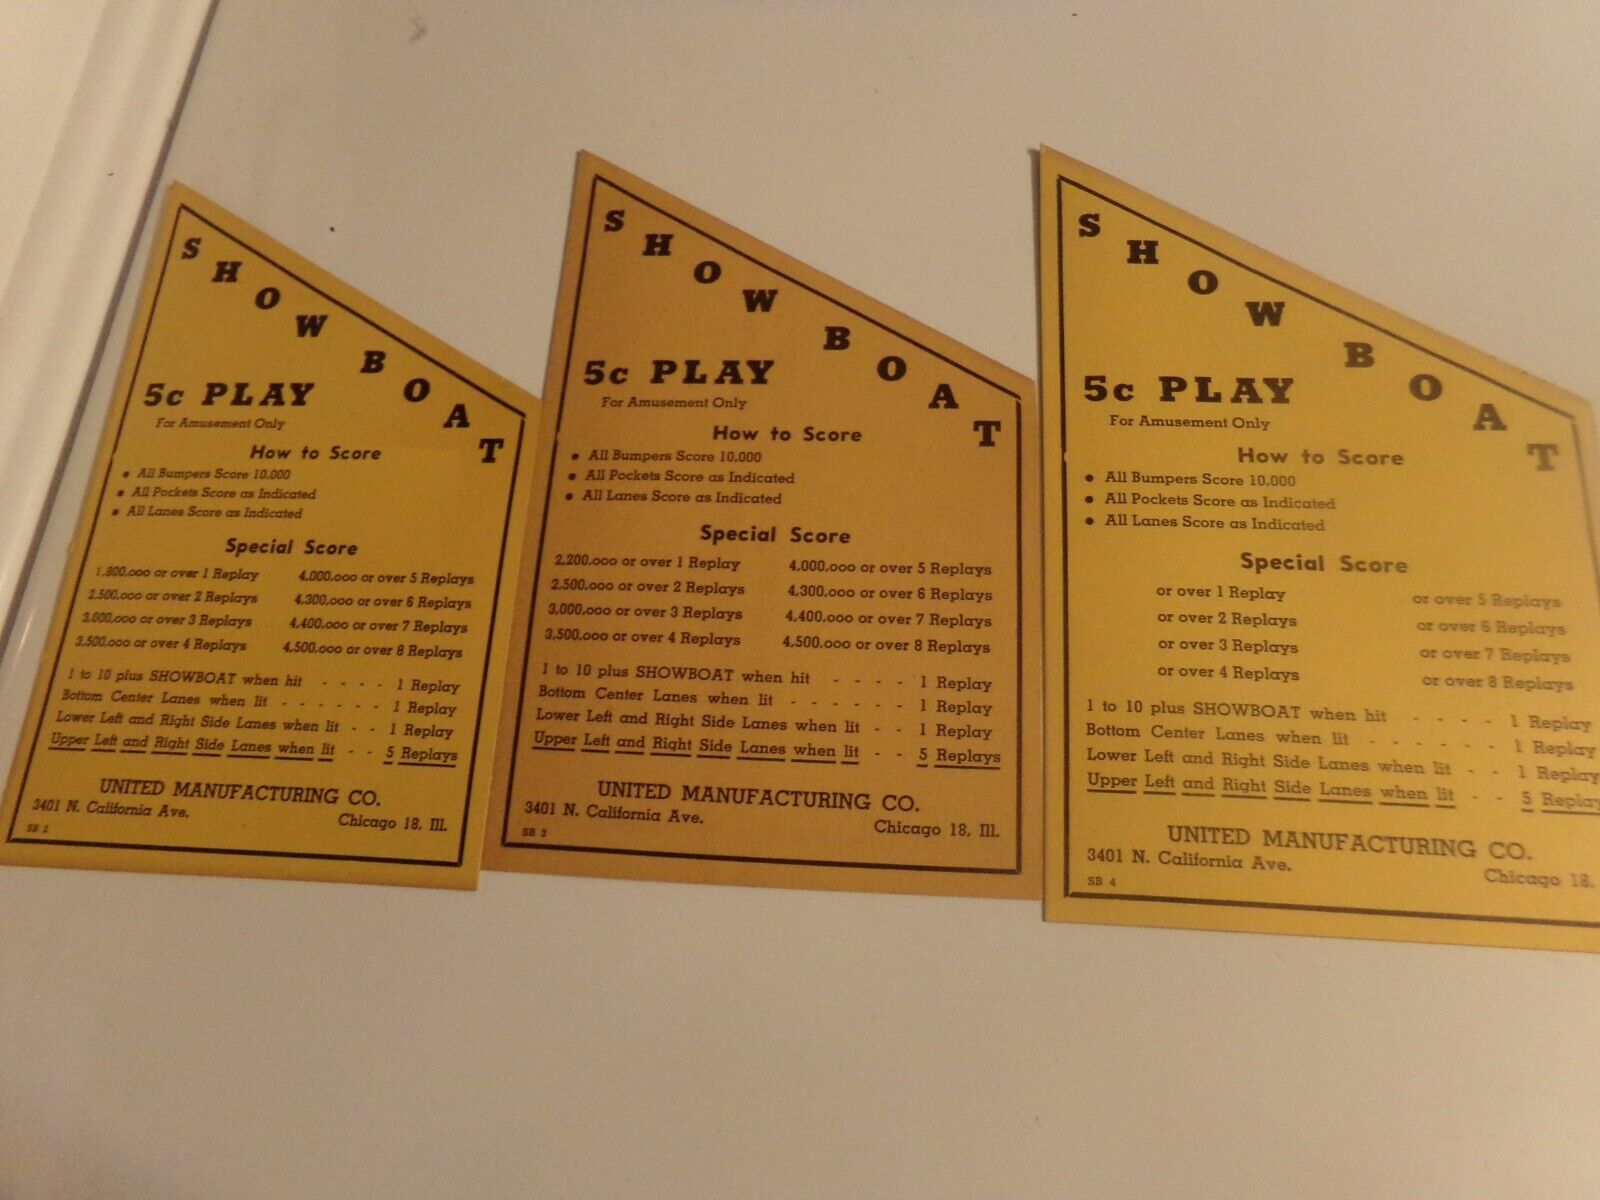 Vintage Original 3 Show Boat Instructions Cards How To Score.united Man, Co